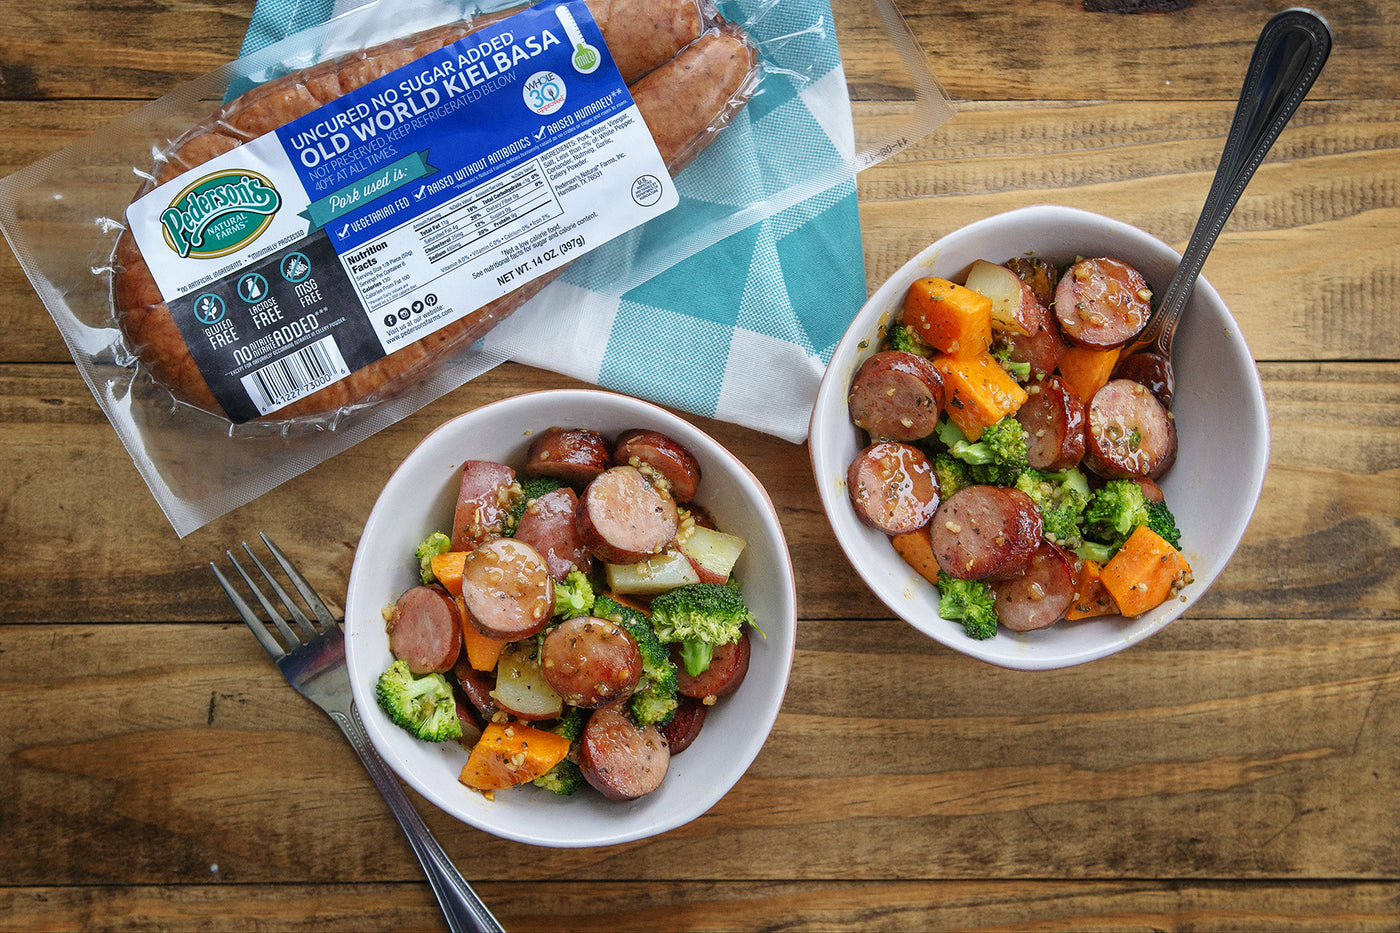 Two bowls of stir fry with gluten free keilbasa sit on a wooden table with a package of Pederson's Farms no sugar gluten free keilbasa next to it.